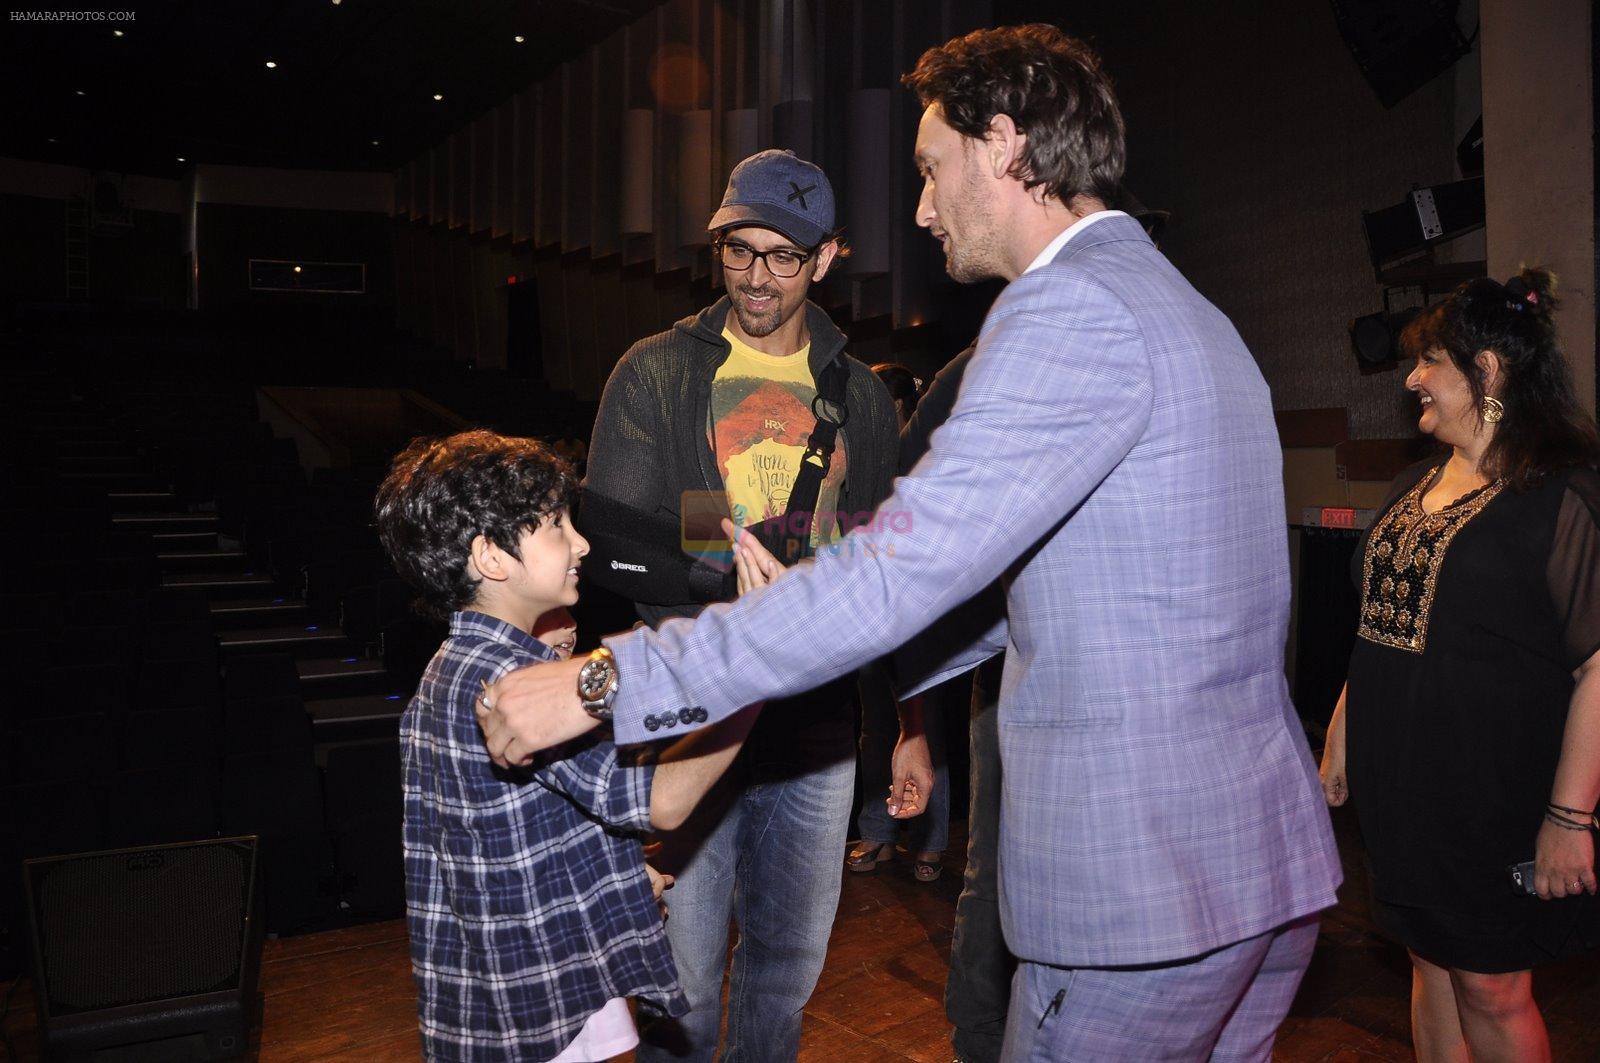 Hrithik Roshan with kids at Raell Padamsee's show by Lior Ruchard in St Andrews on 8th Nov 2014